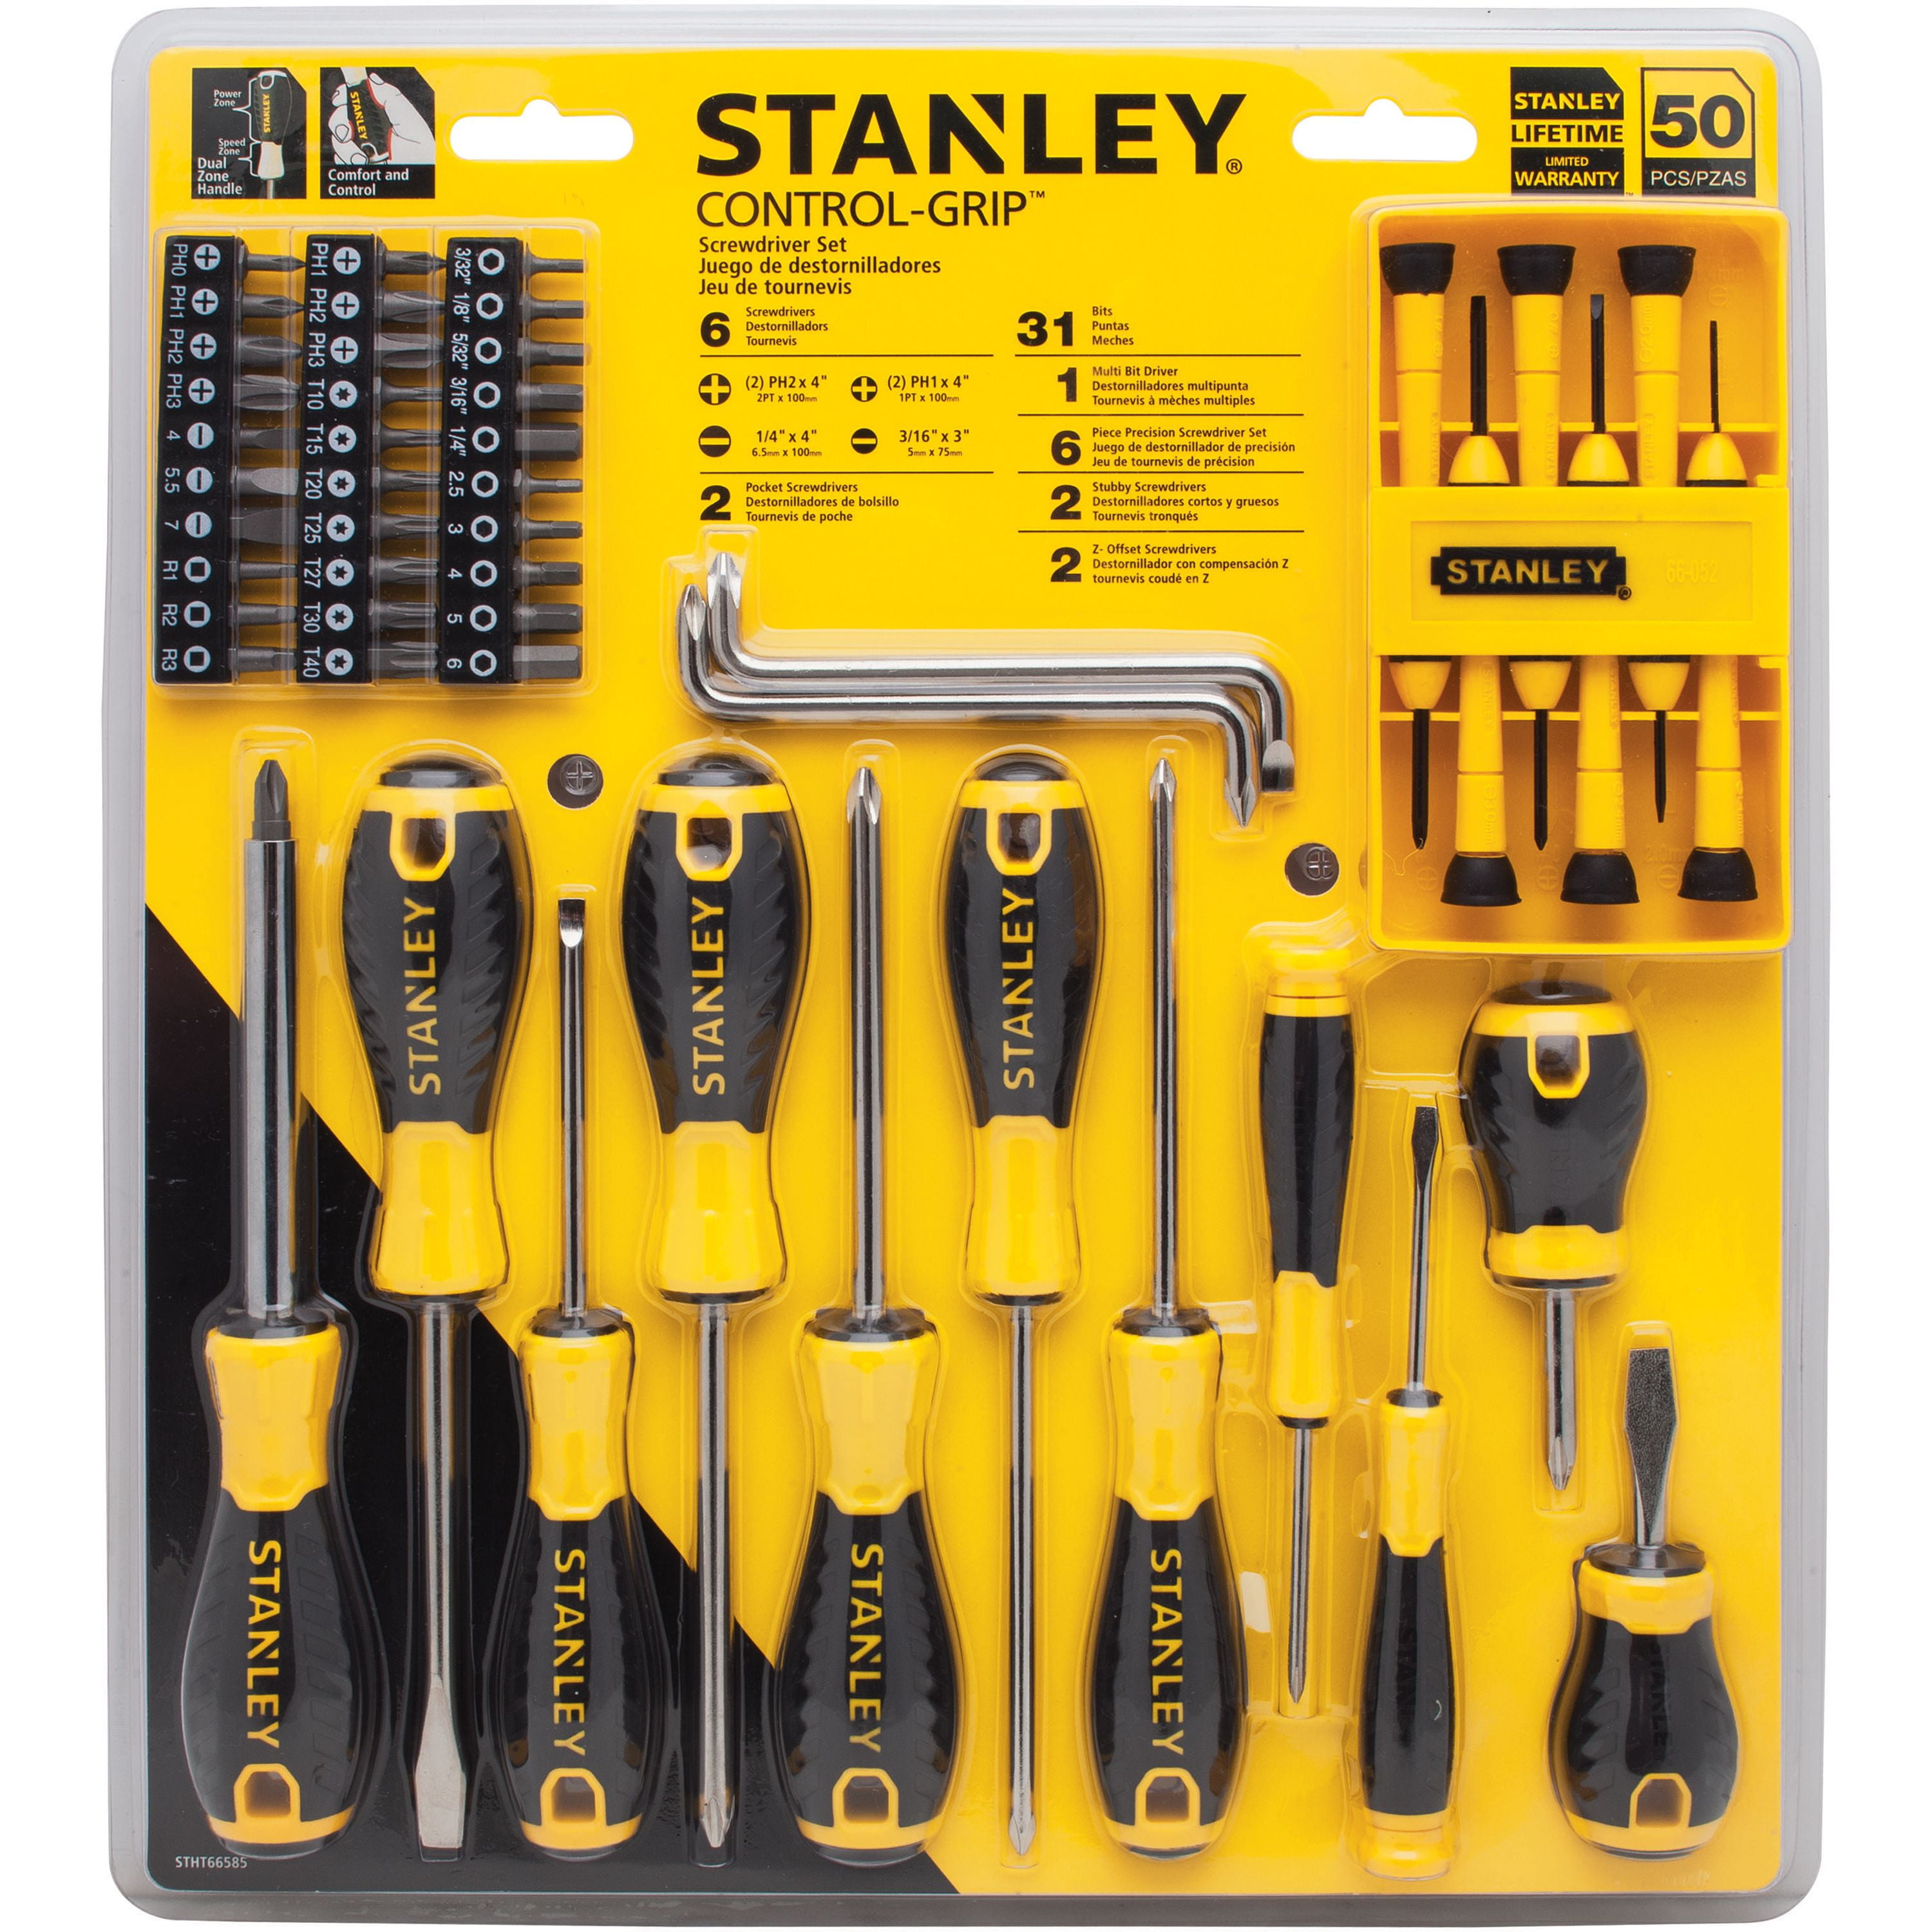 NEW ~ Stanley Control-Grip 17 piece screwdriver set Free Shipping 